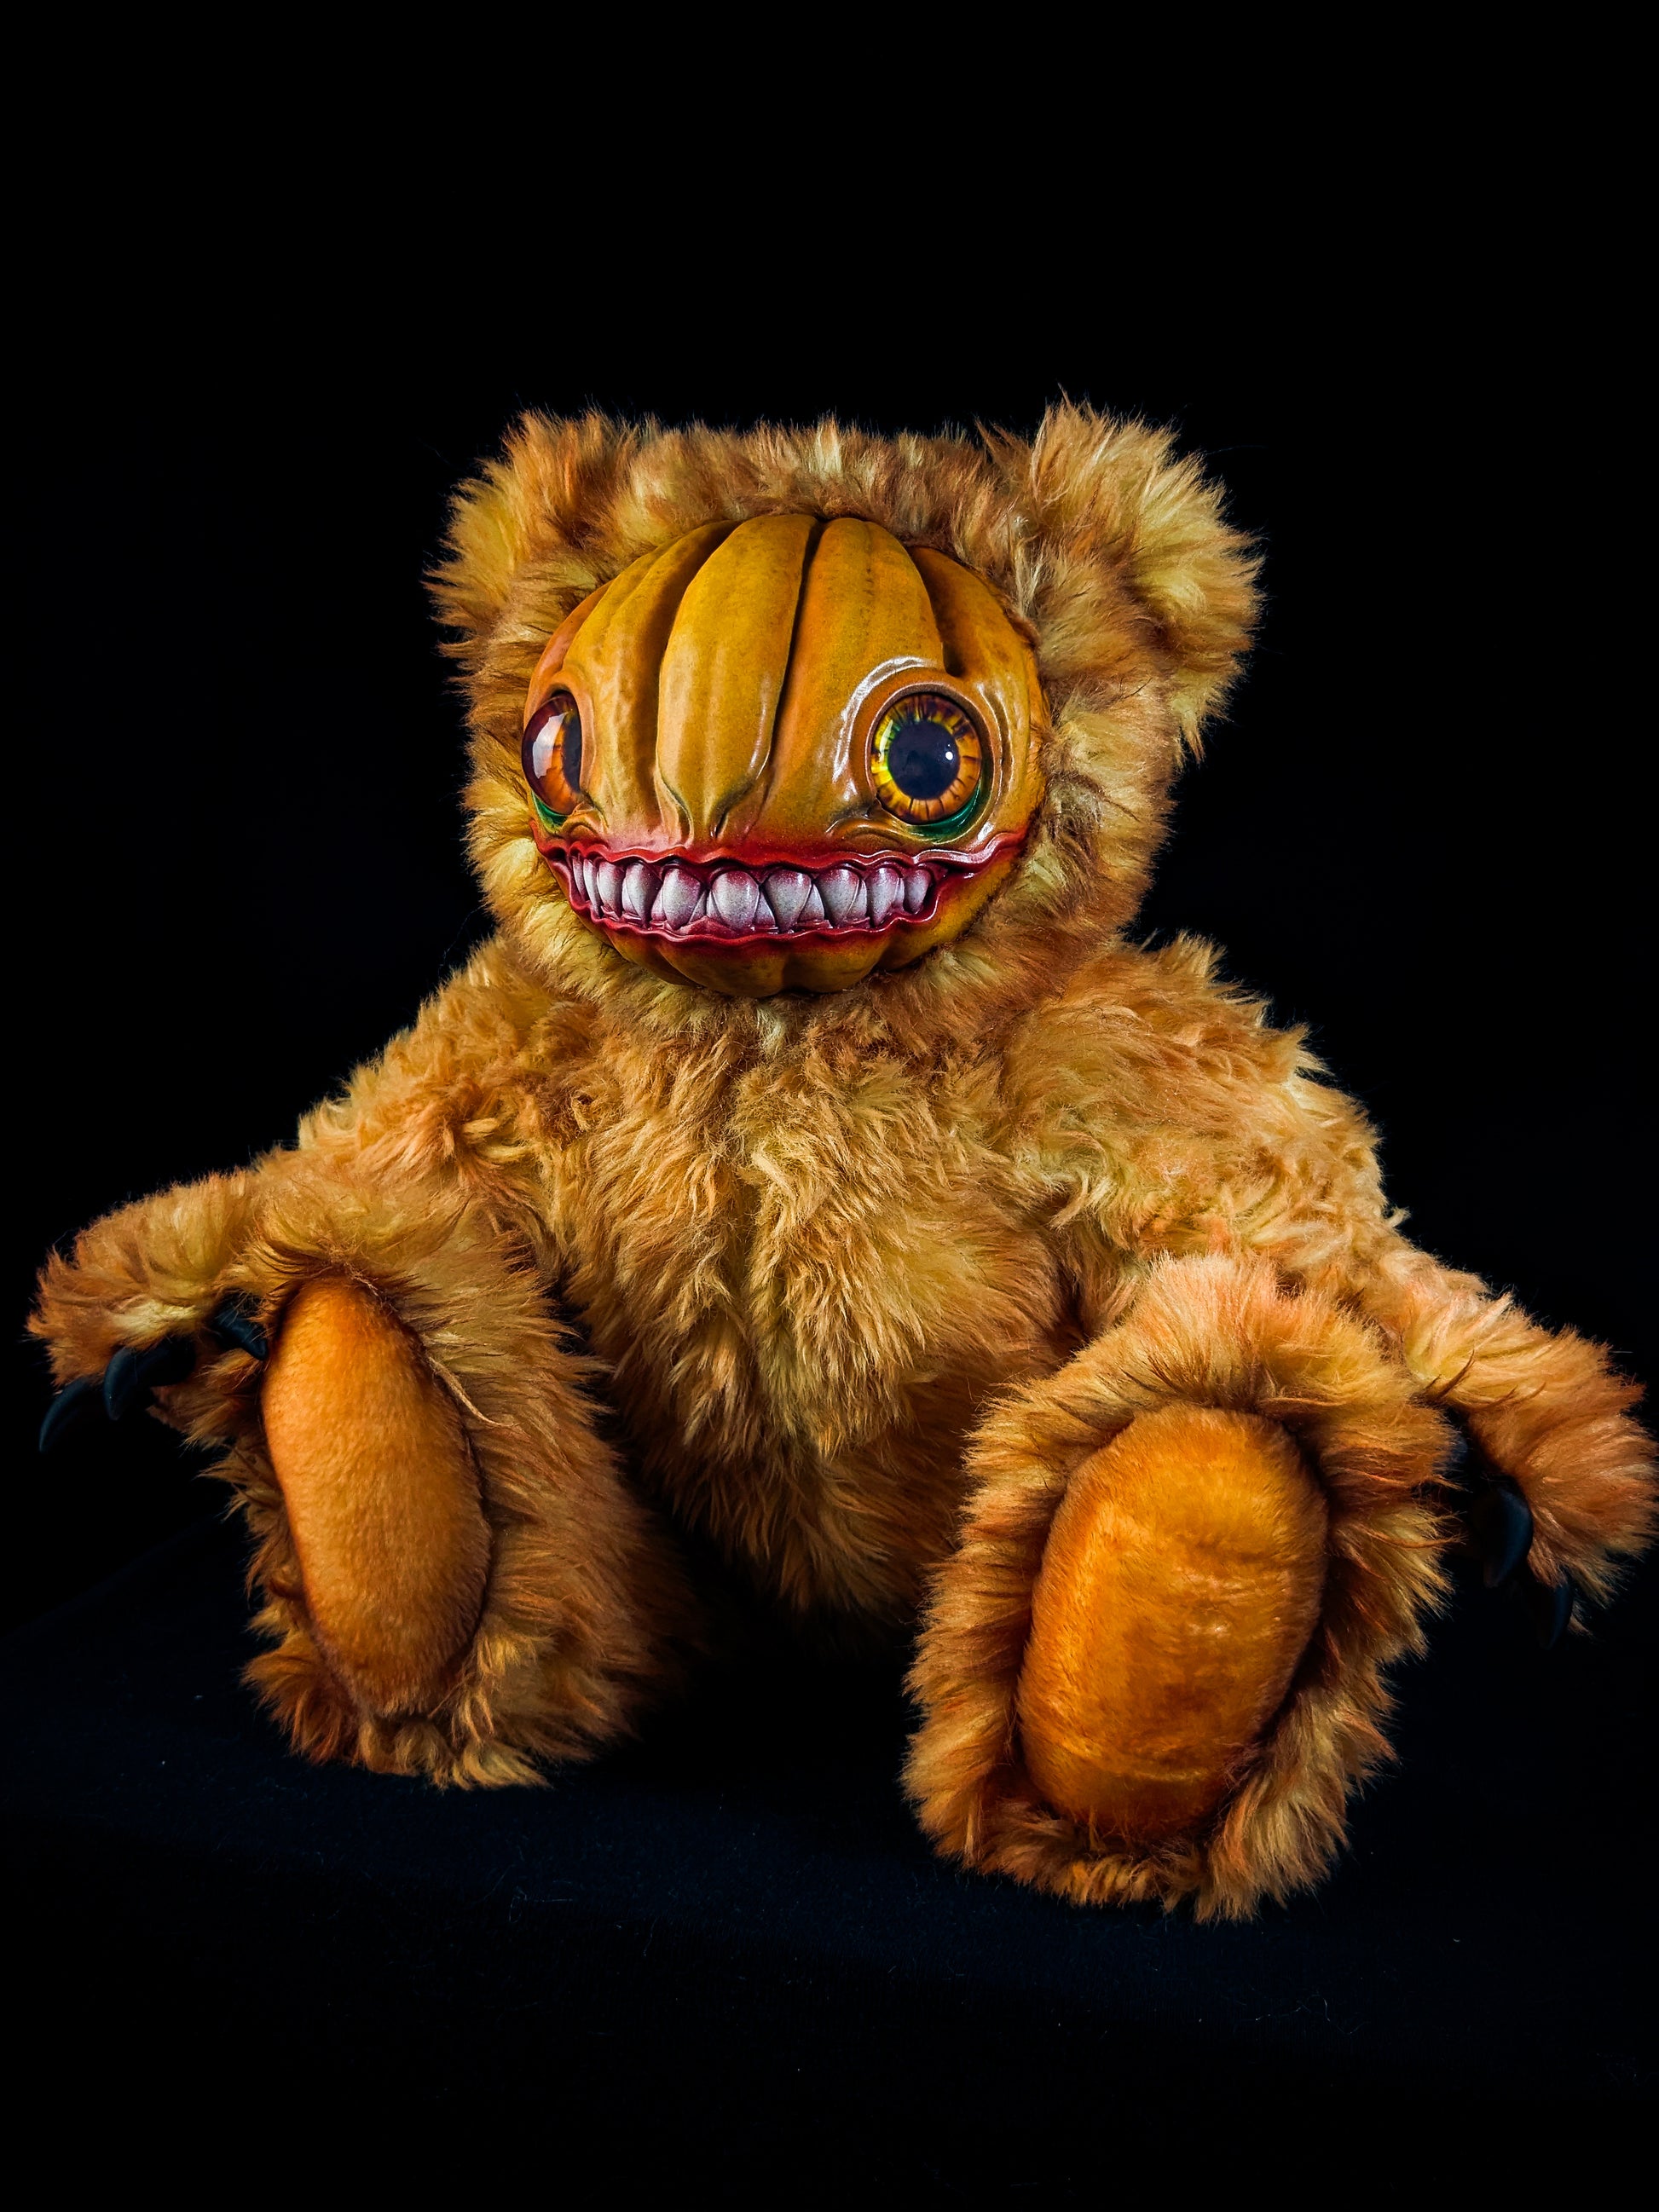 Grizzly Gourd: HAUNTVESTER - CRYPTCRITZ Handcrafted Creepy Cute Halloween Pumpkin Art Doll Plush Toy for Spooky Souls